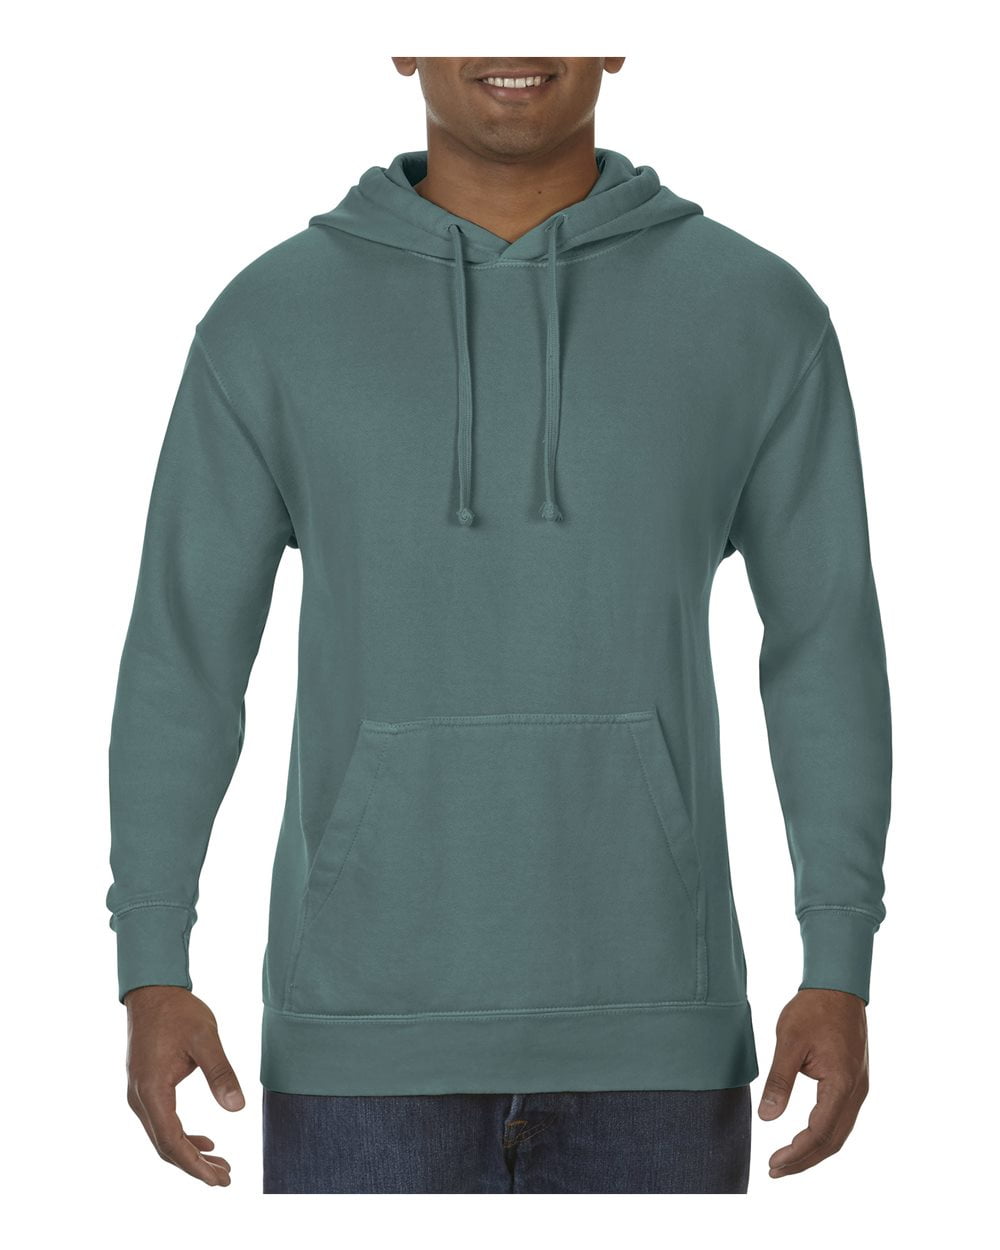 BLUE SPRUCE Garment-Dyed Pullover Hood Comfort Colors 9.5 oz Garment-Dyed Pullover Hood S 9.5 oz 